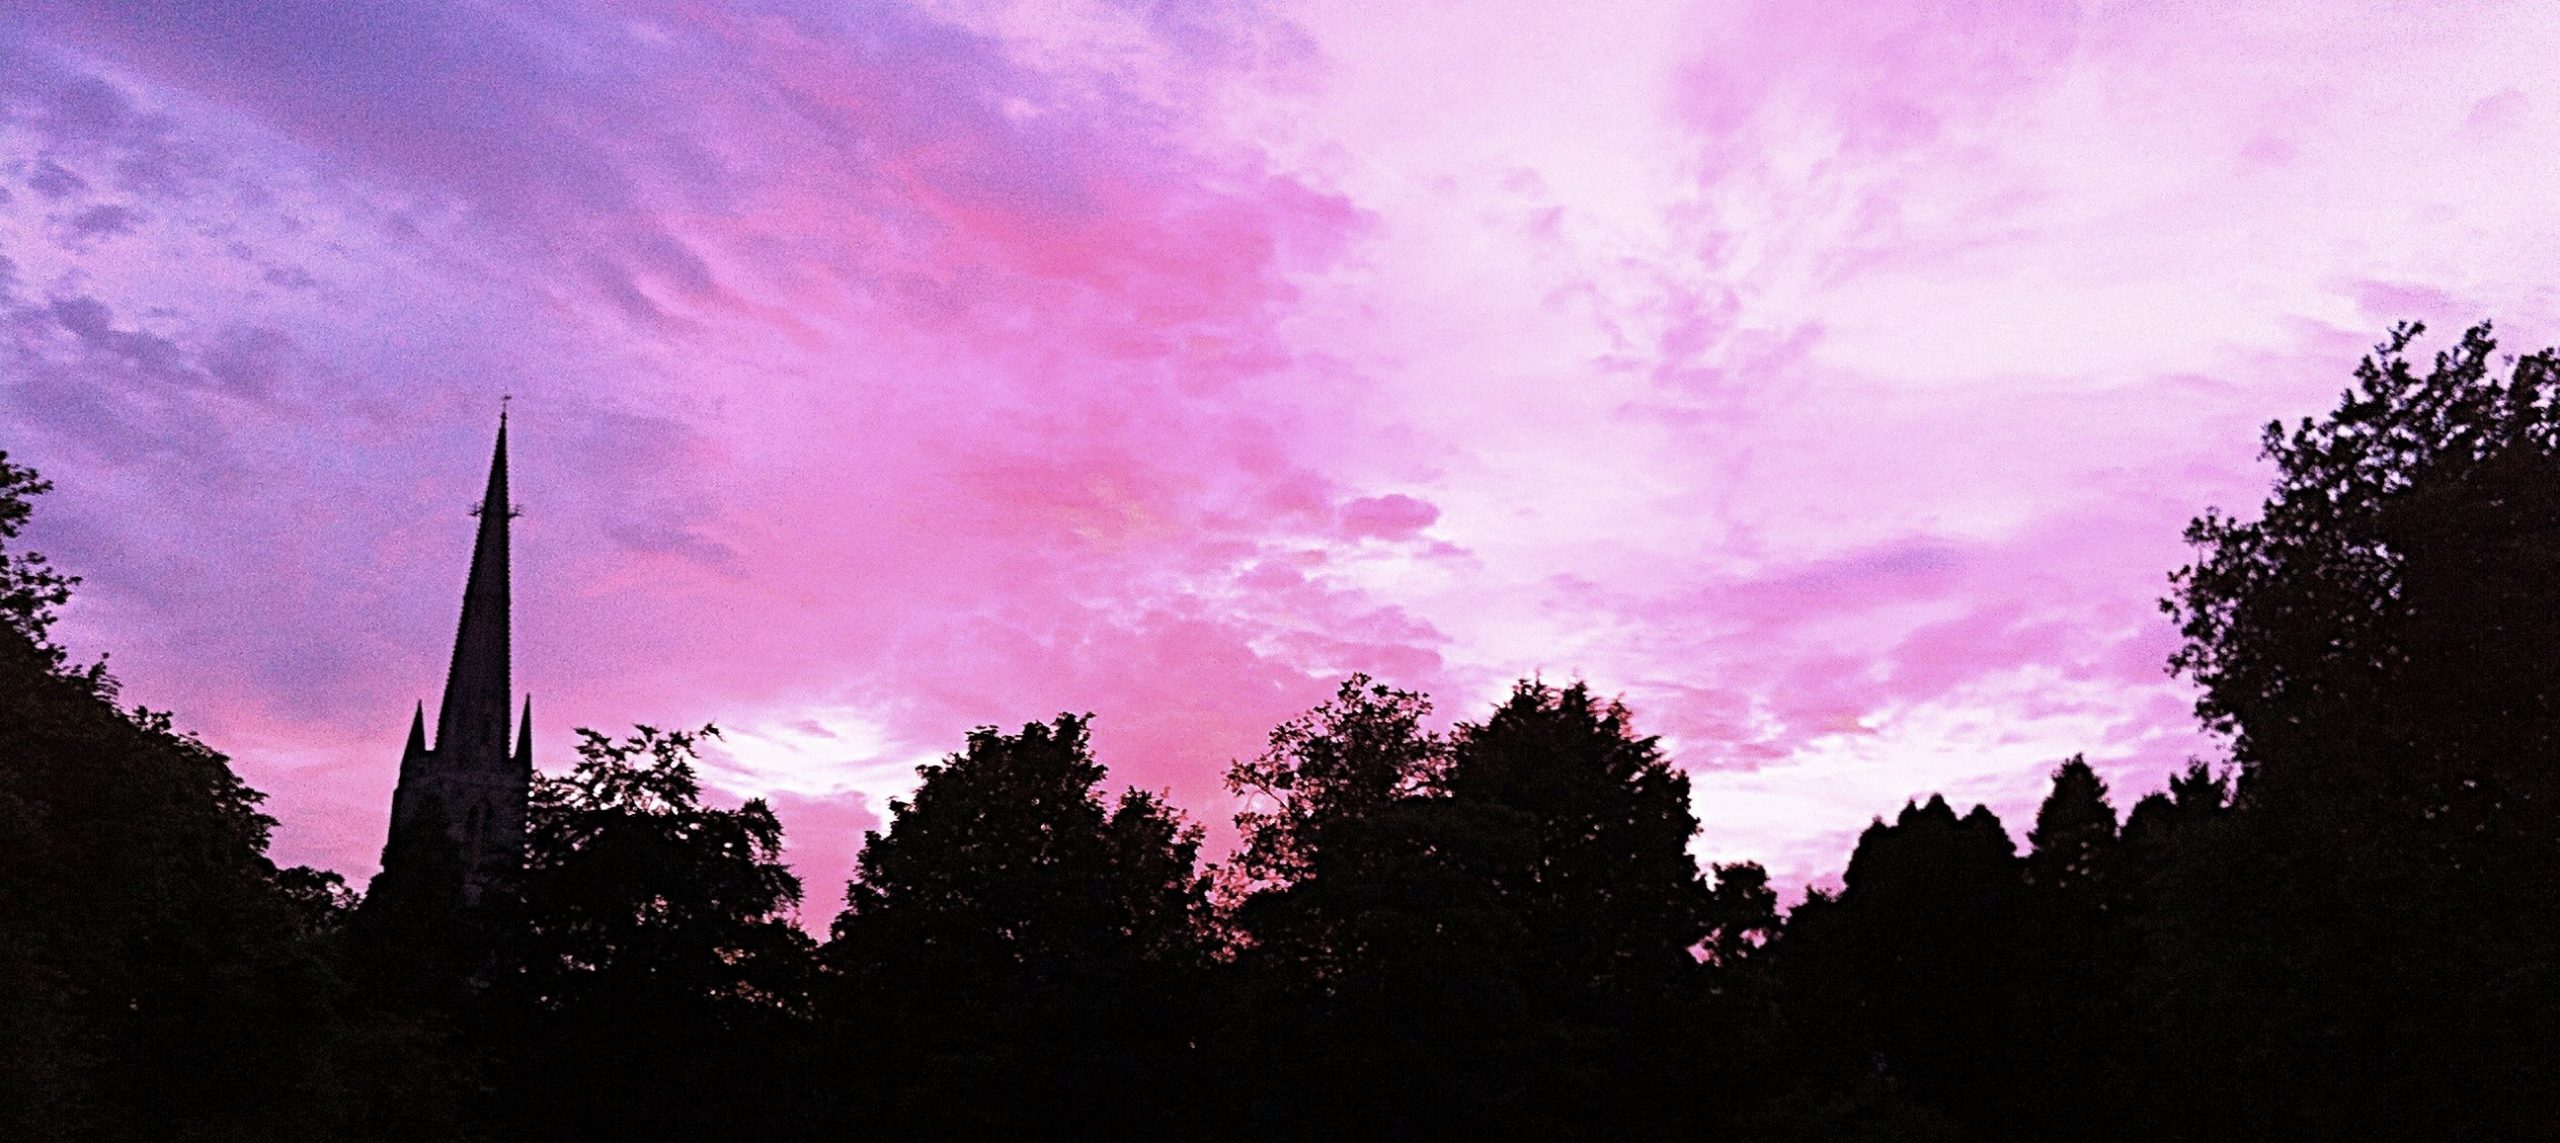 A silhouette of a church spire and some trees. The sky is purple, pink and blue with a beautiful sunset